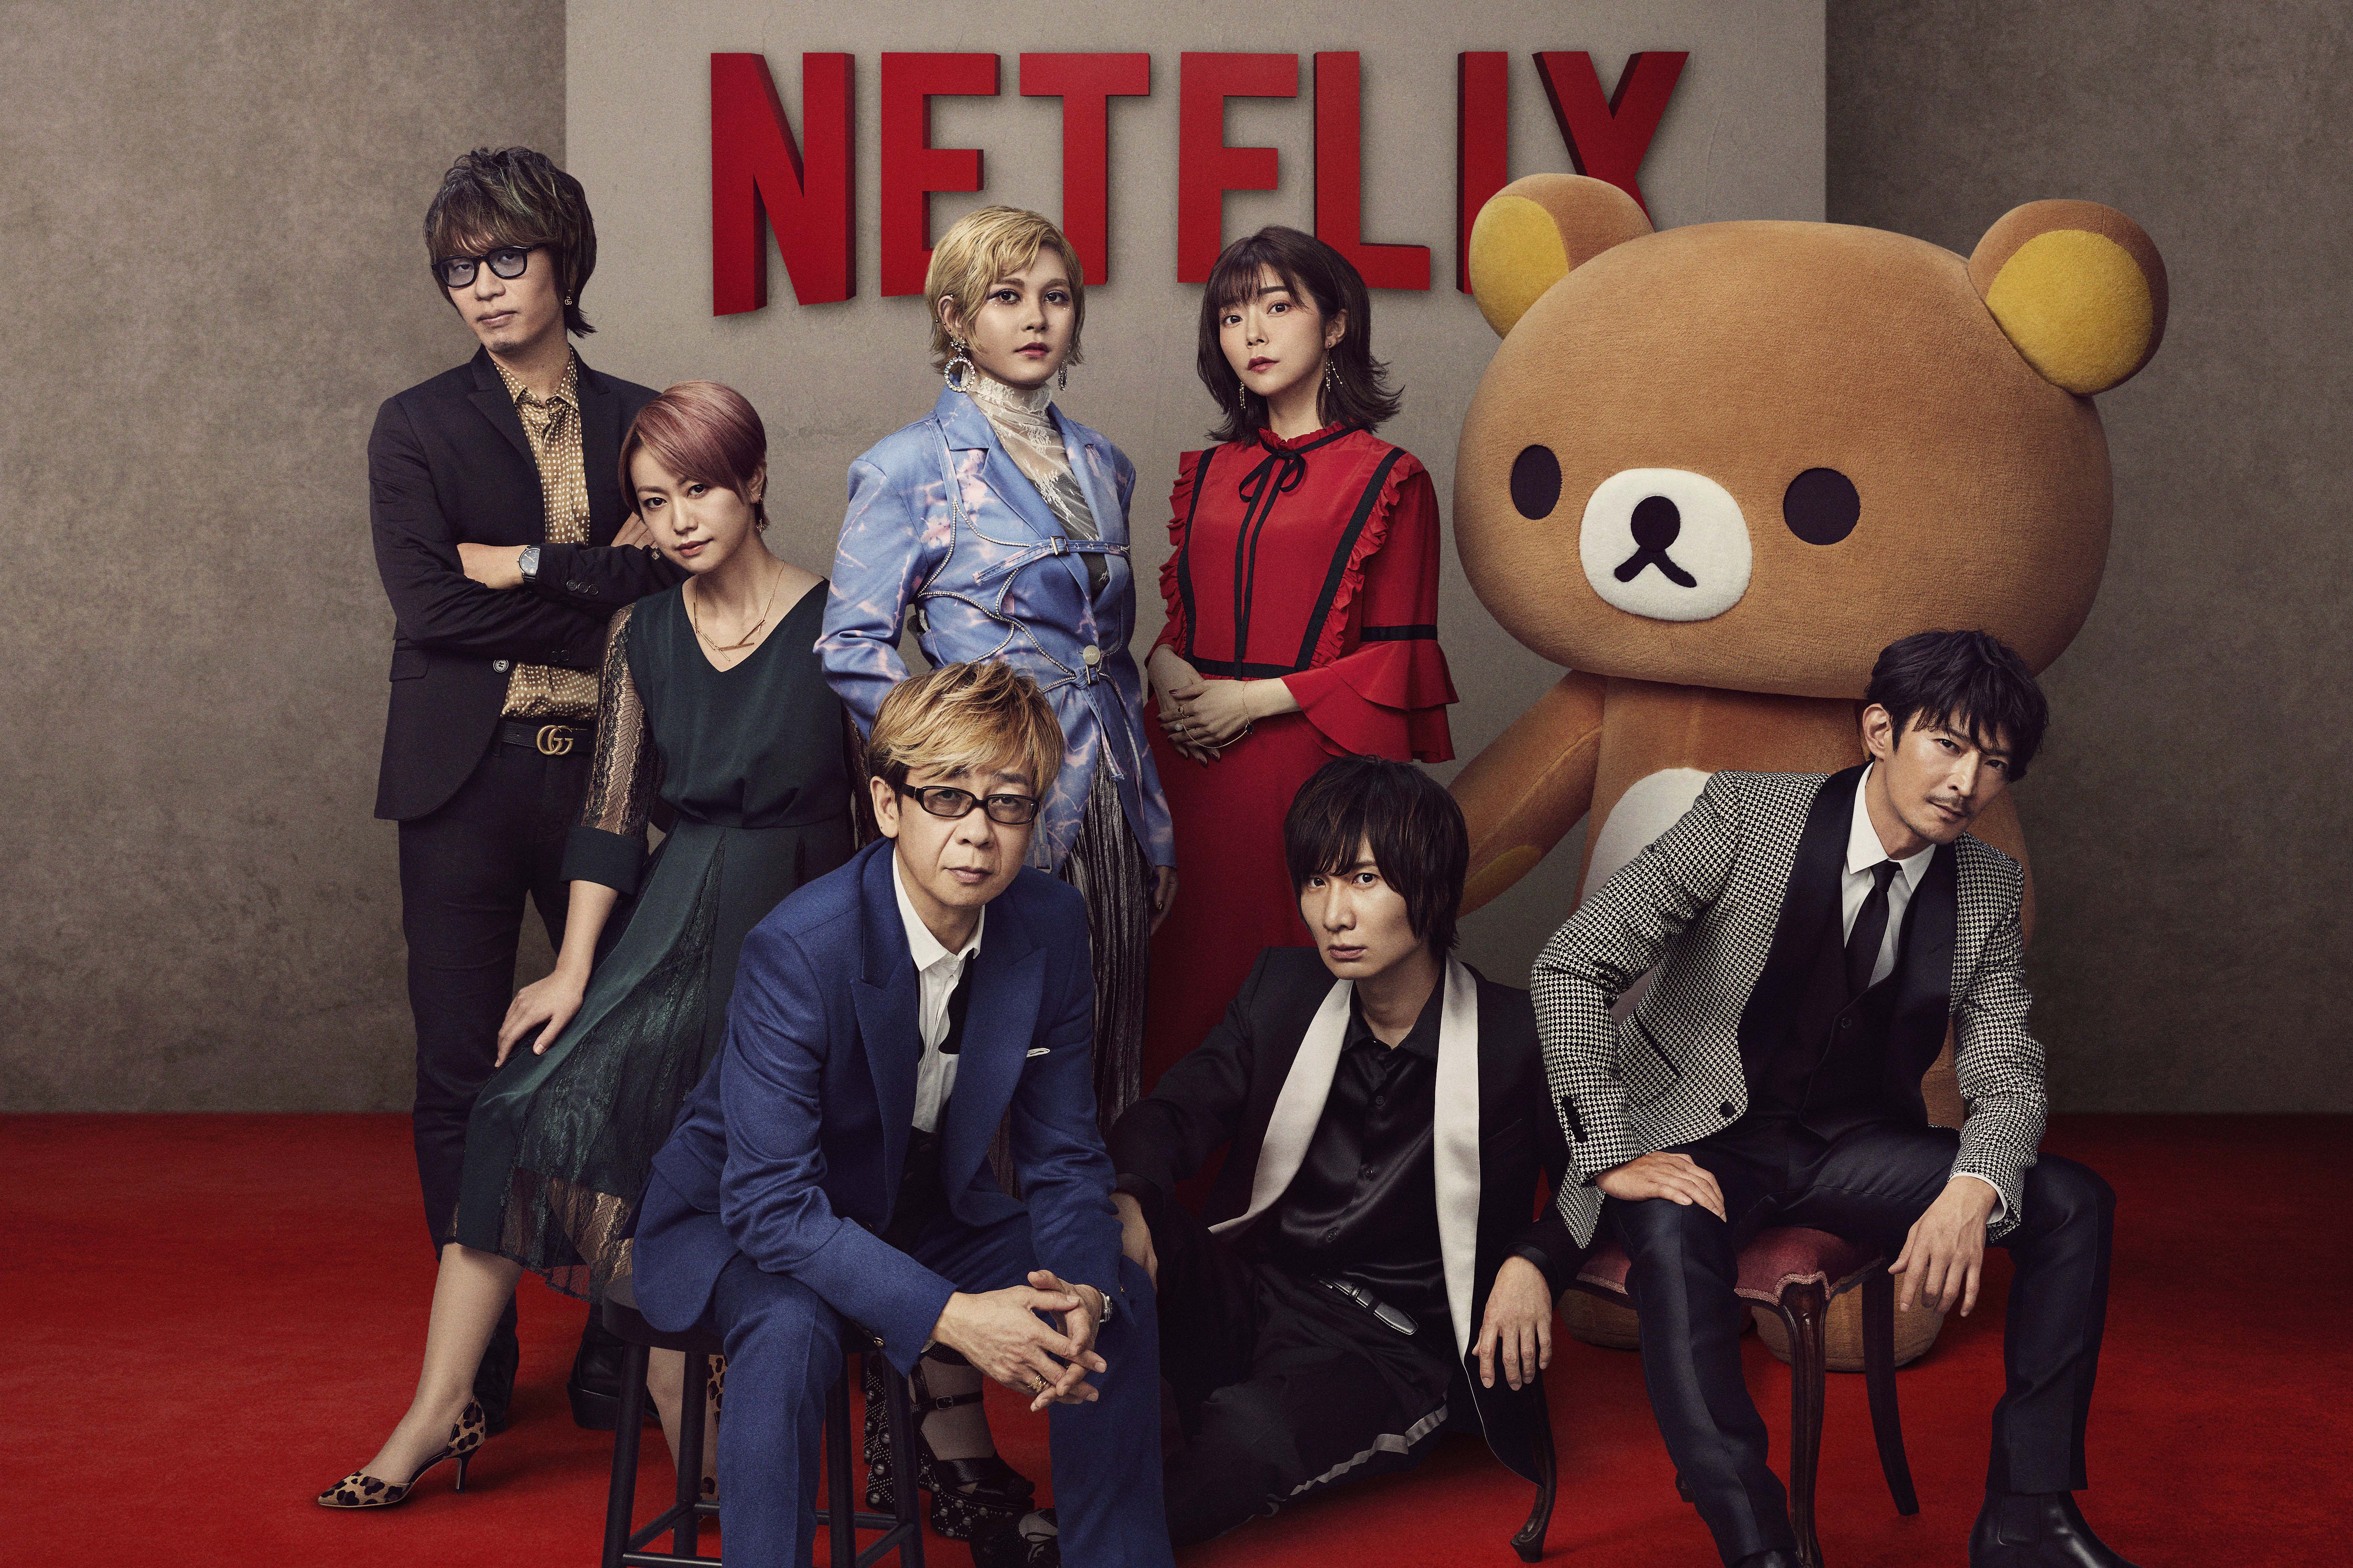 Five More Japanese Anime Projects Announced by Netflix